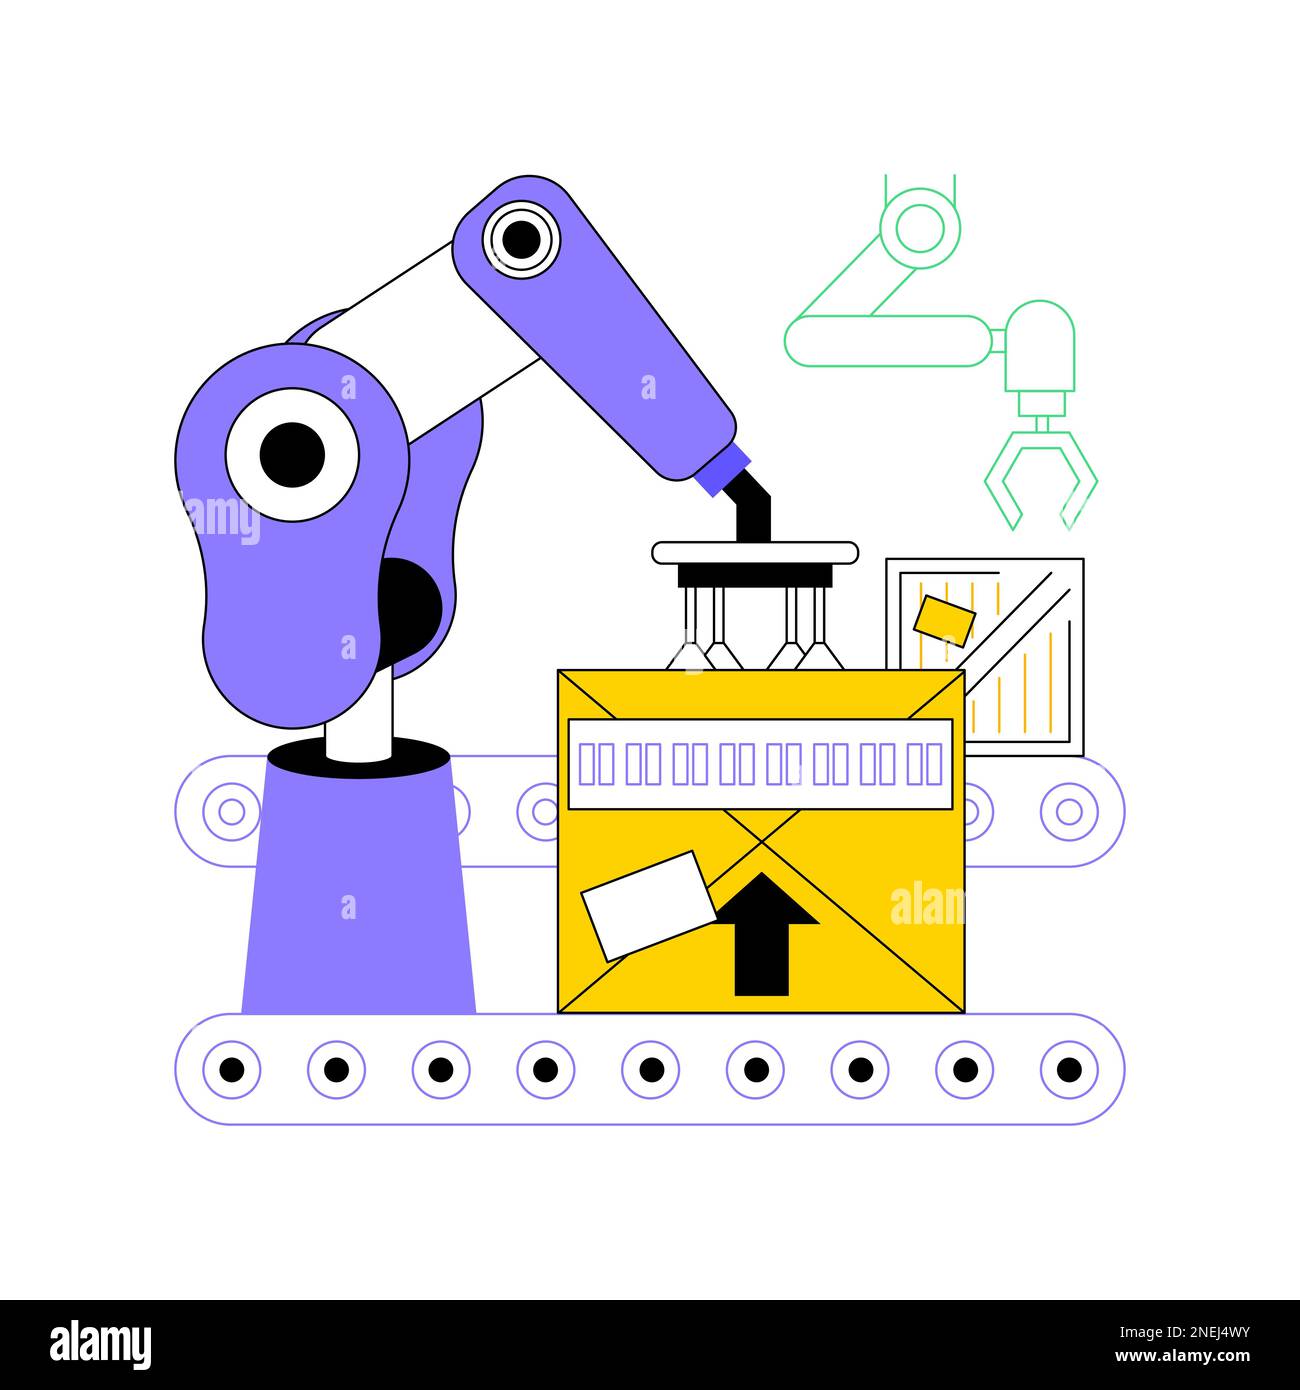 Automated sortation system isolated cartoon vector illustrations. Automated robotic arm sorting goods in smart warehouse, inventory technologies, packing items process vector cartoon. Stock Vector